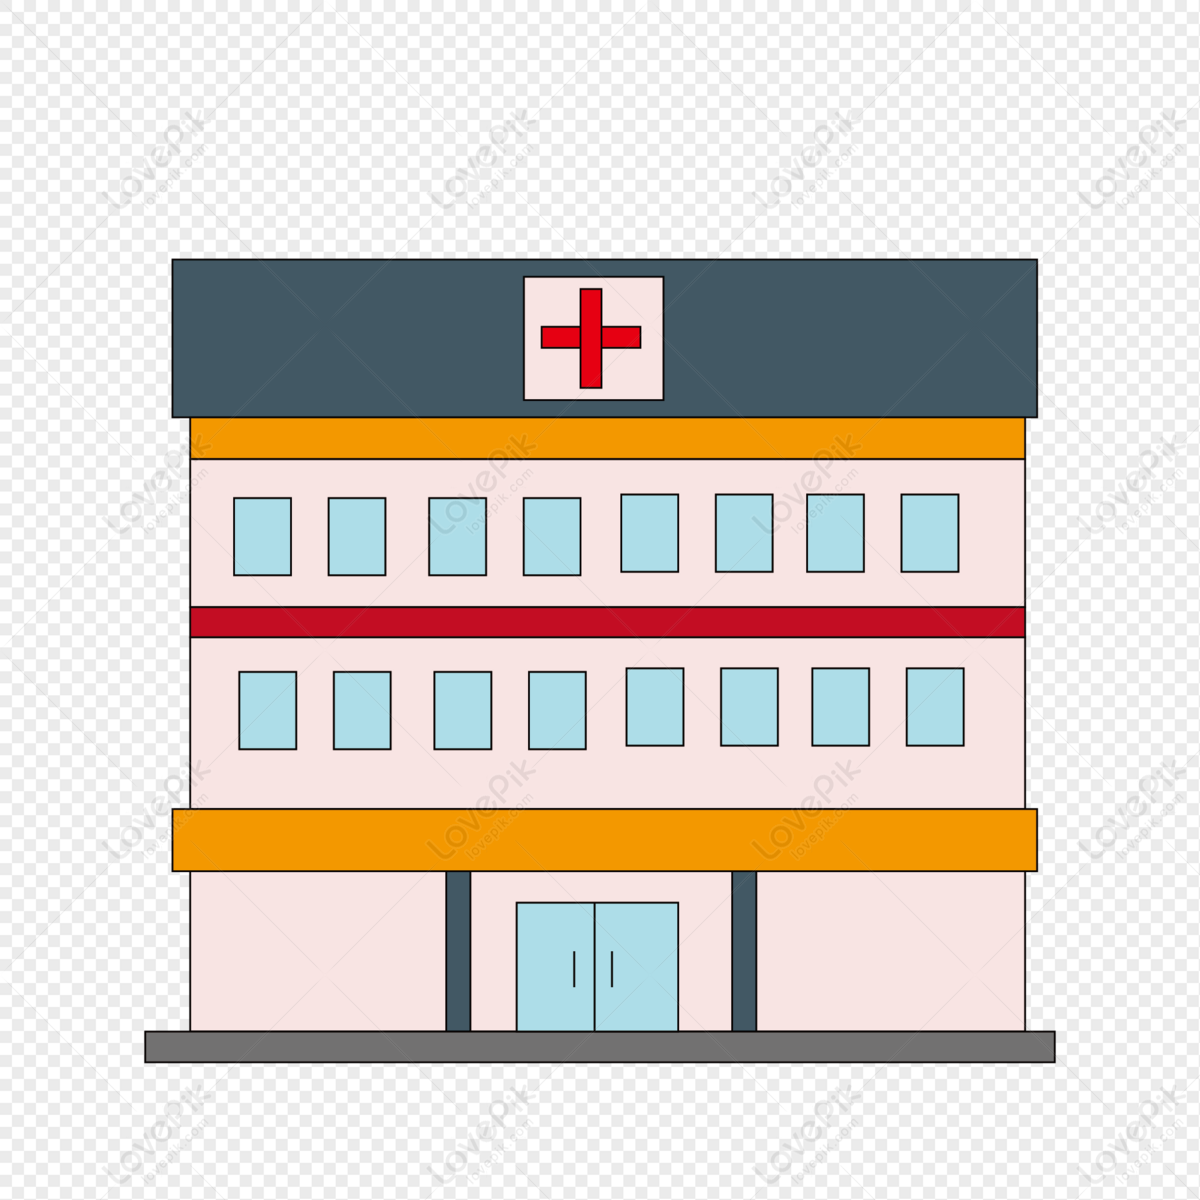 Hospital PNG Transparent Background And Clipart Image For Free Download -  Lovepik | 401566450